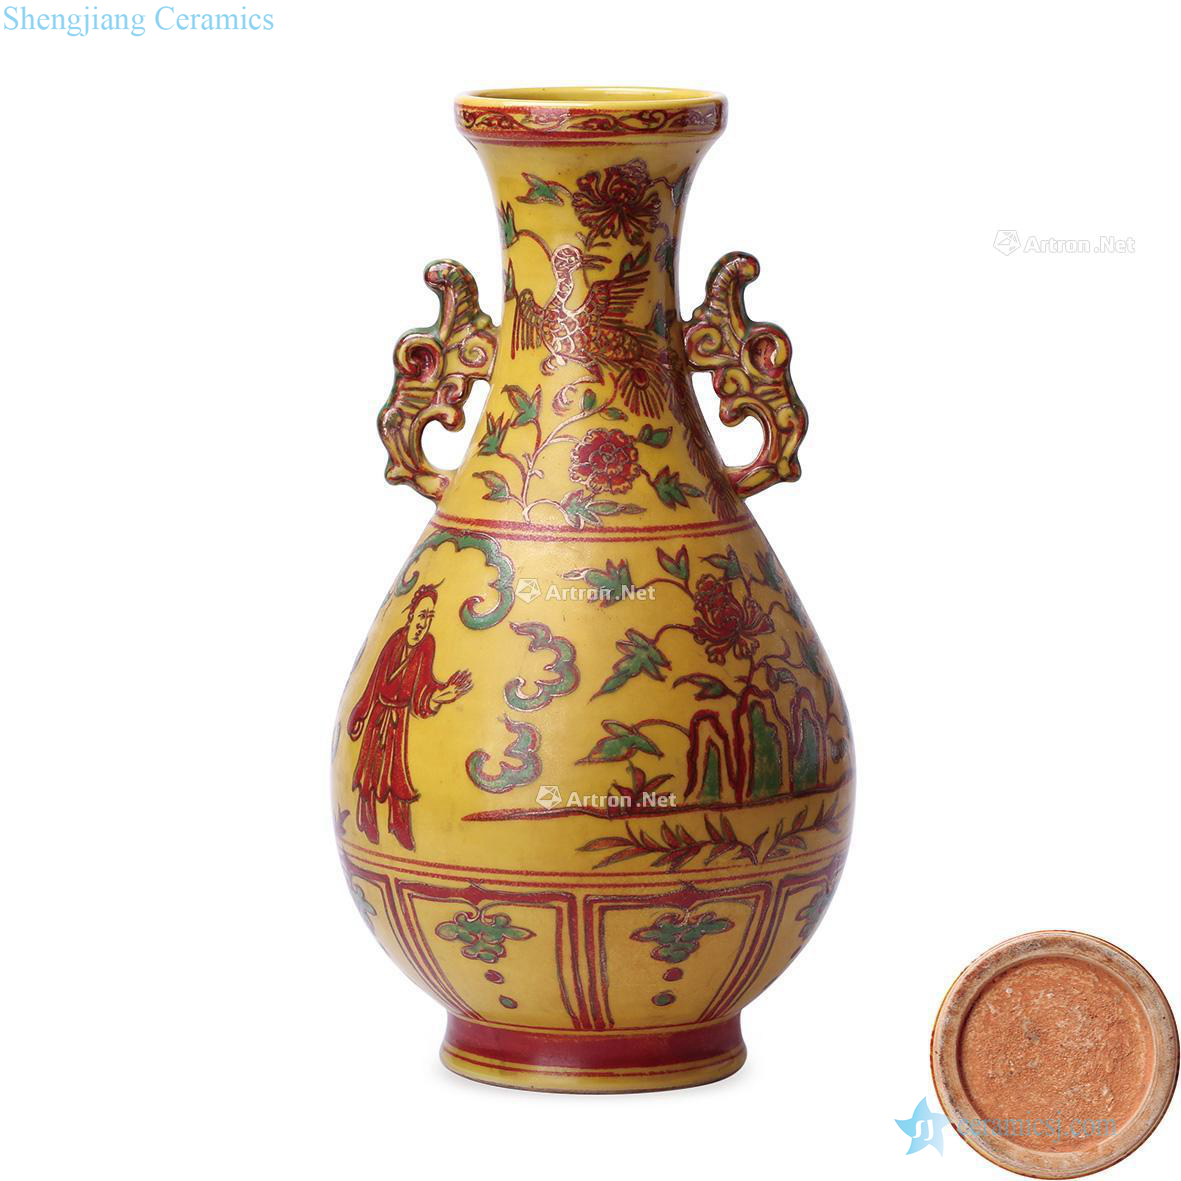 The yuan dynasty Yellow to red colour character story dish buccal bottle with a pair of green color